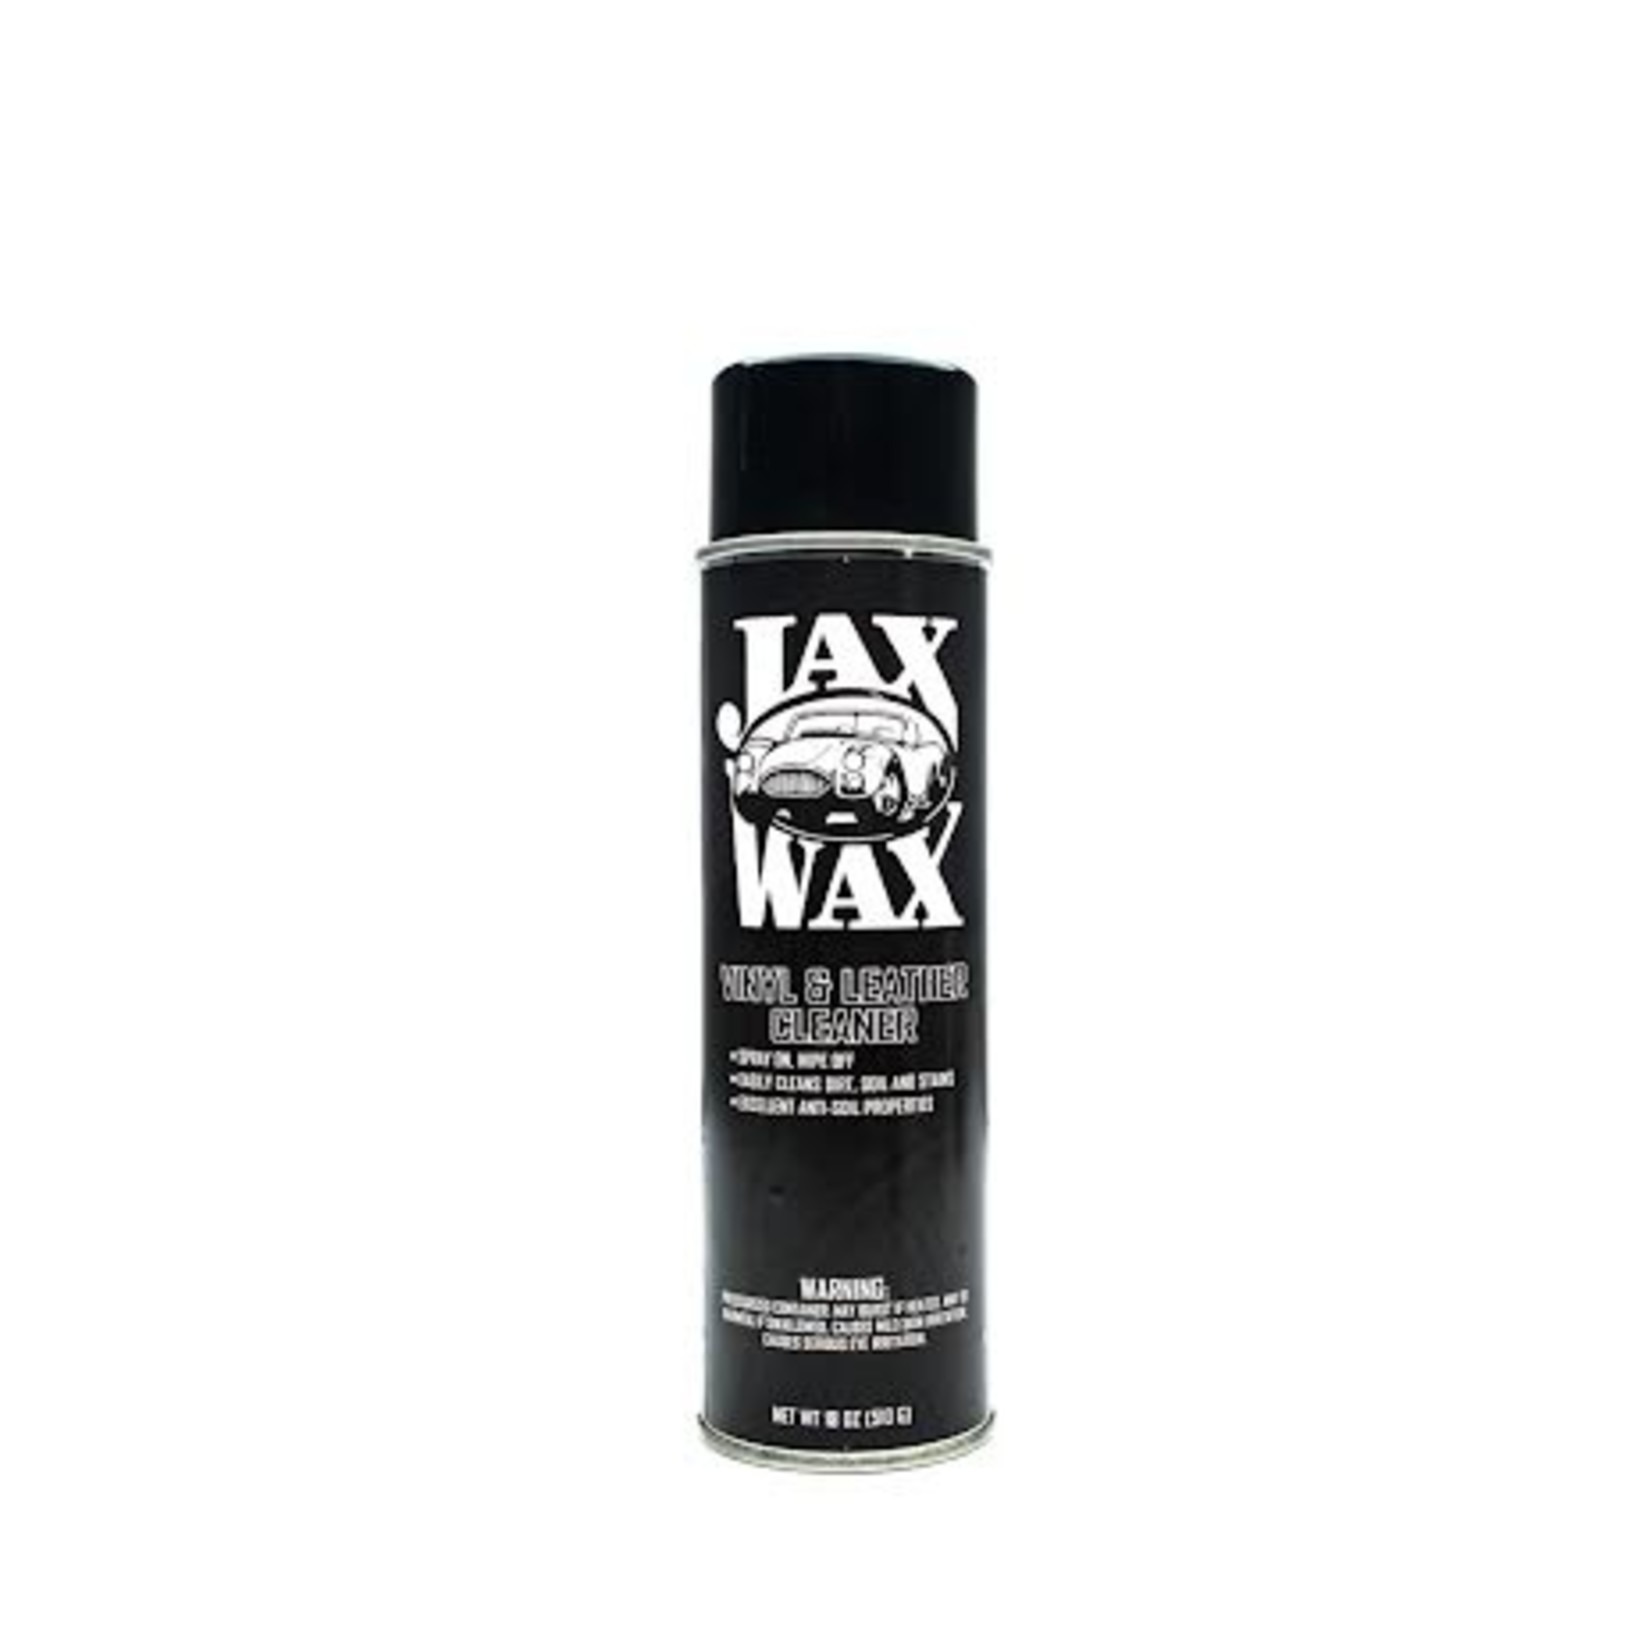 Jax Wax, Leather and Vinyl Cleaning Brush, Leather Cleaning, Car Vinyl, Leather Cleaner for Cars, Car Brush